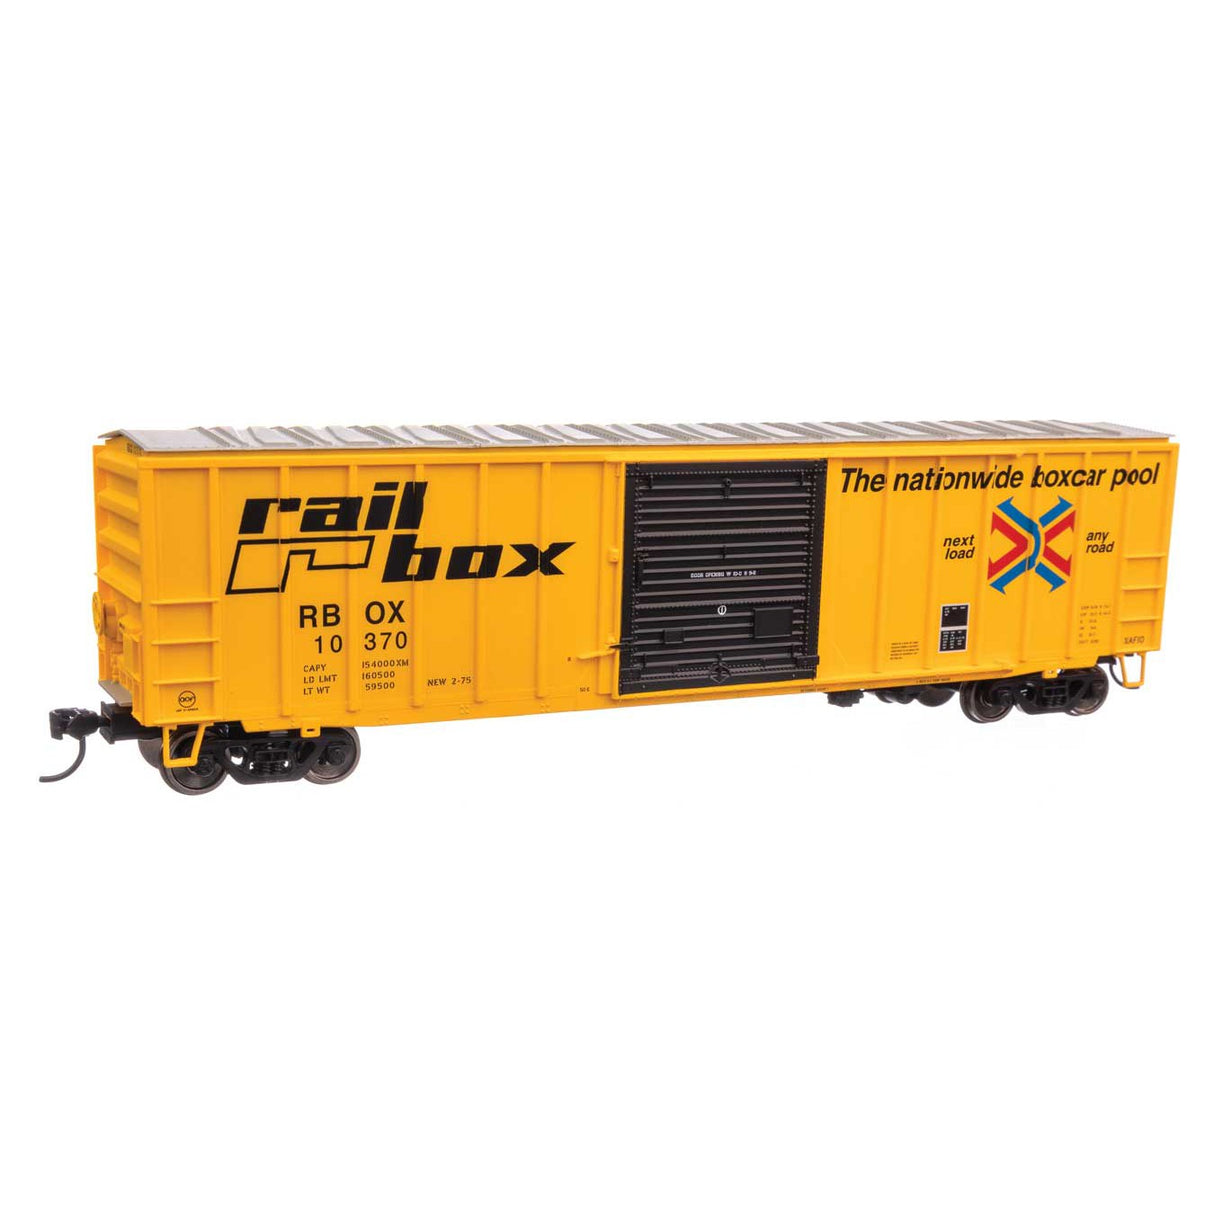 Walthers Mainline HO Scale Railbox RBOX #10370 50' ACF Exterior Post Boxcar